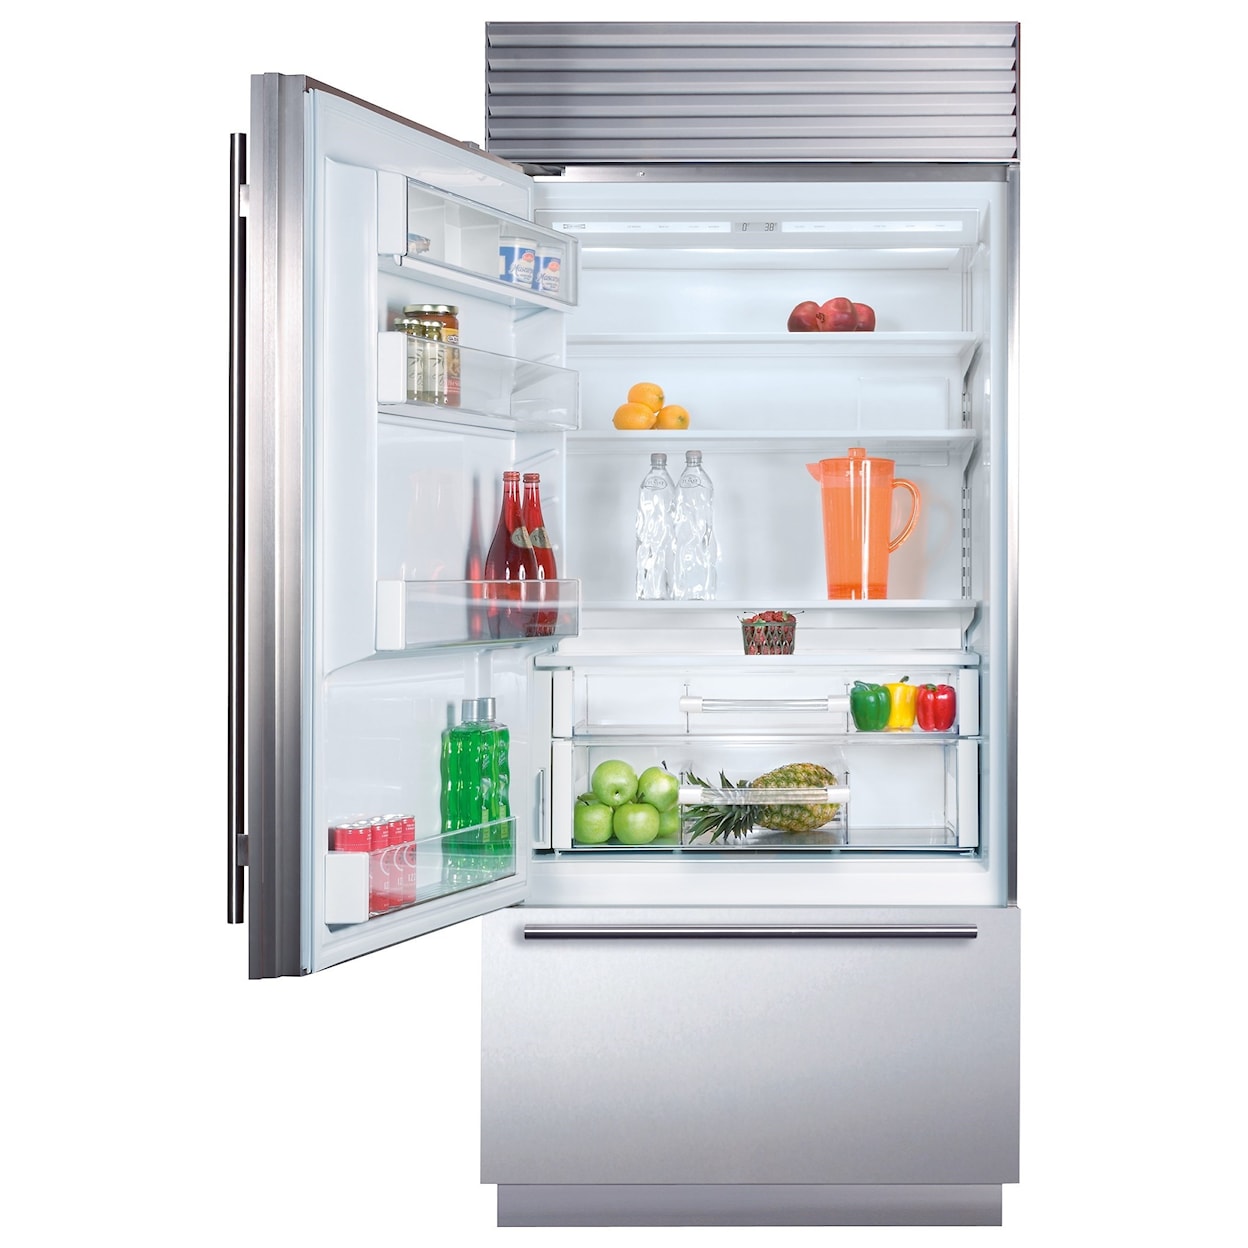 Sub-Zero Built-In Refrigeration 36" Built-In Over-and-Under Refrigerator